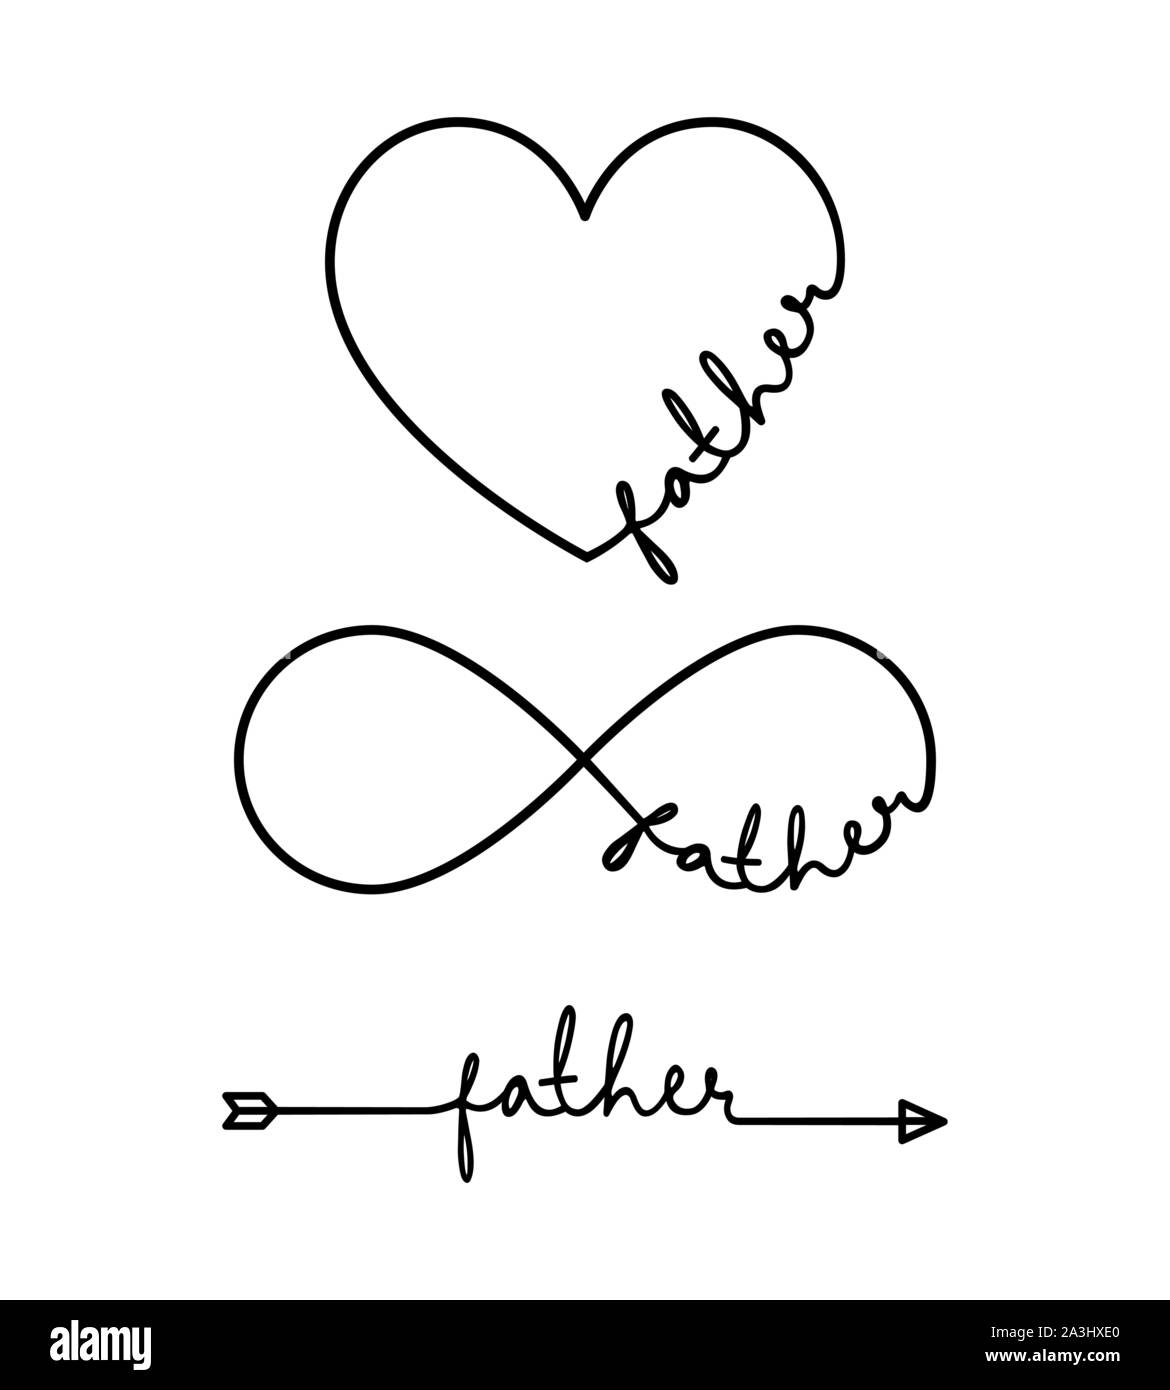 Father - word with infinity symbol, hand drawn heart, one black arrow line. Minimalistic drawing of phrase illustration Stock Vector